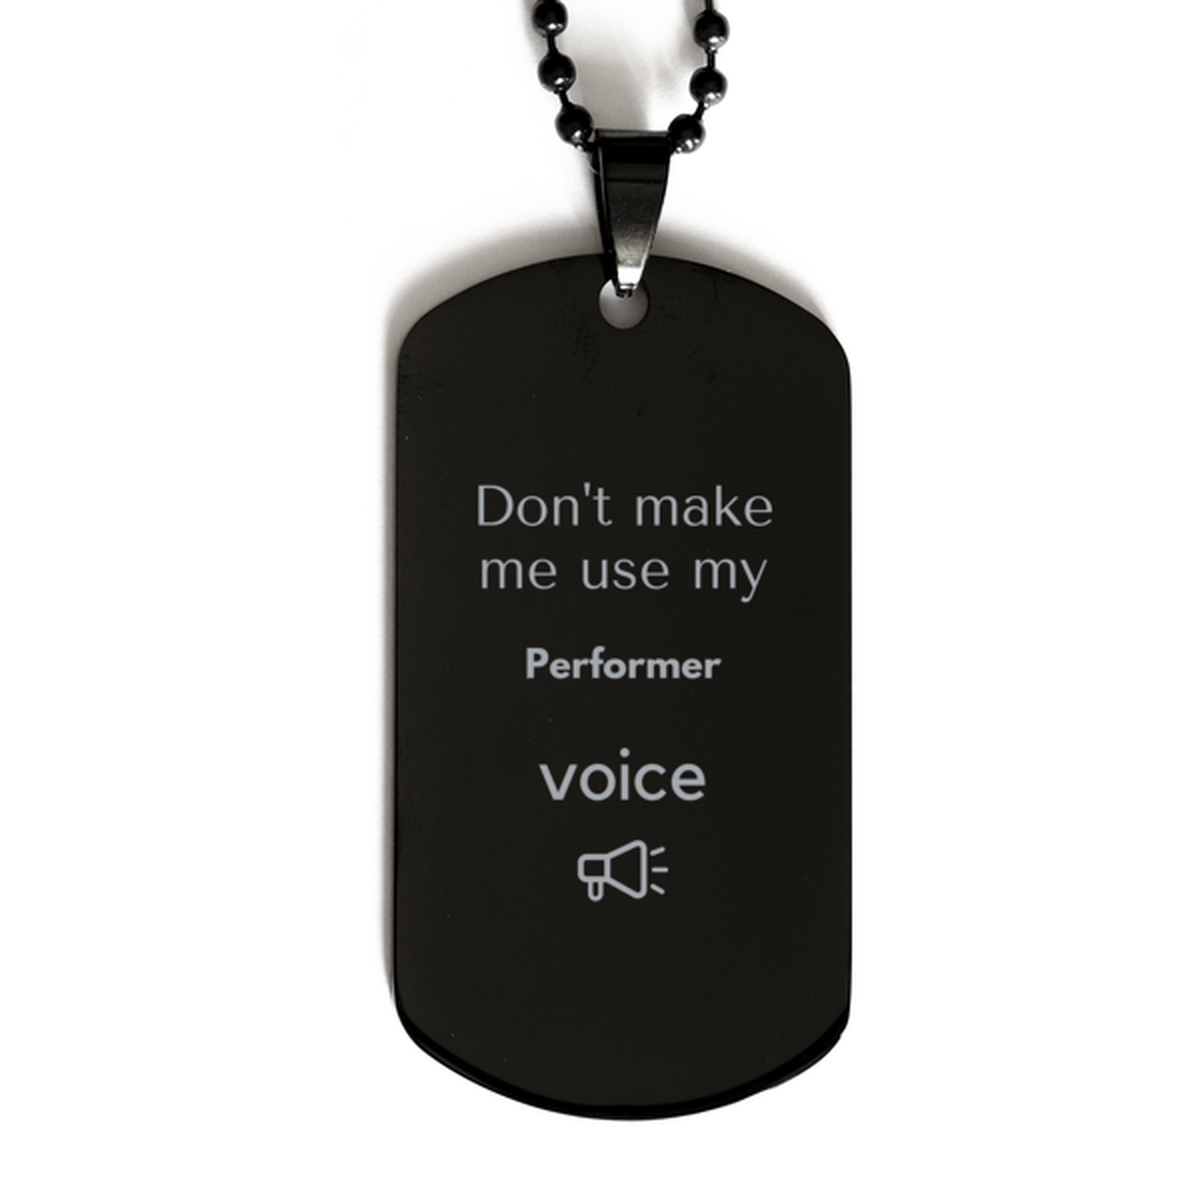 Don't make me use my Performer voice, Sarcasm Performer Gifts, Christmas Performer Black Dog Tag Birthday Unique Gifts For Performer Coworkers, Men, Women, Colleague, Friends